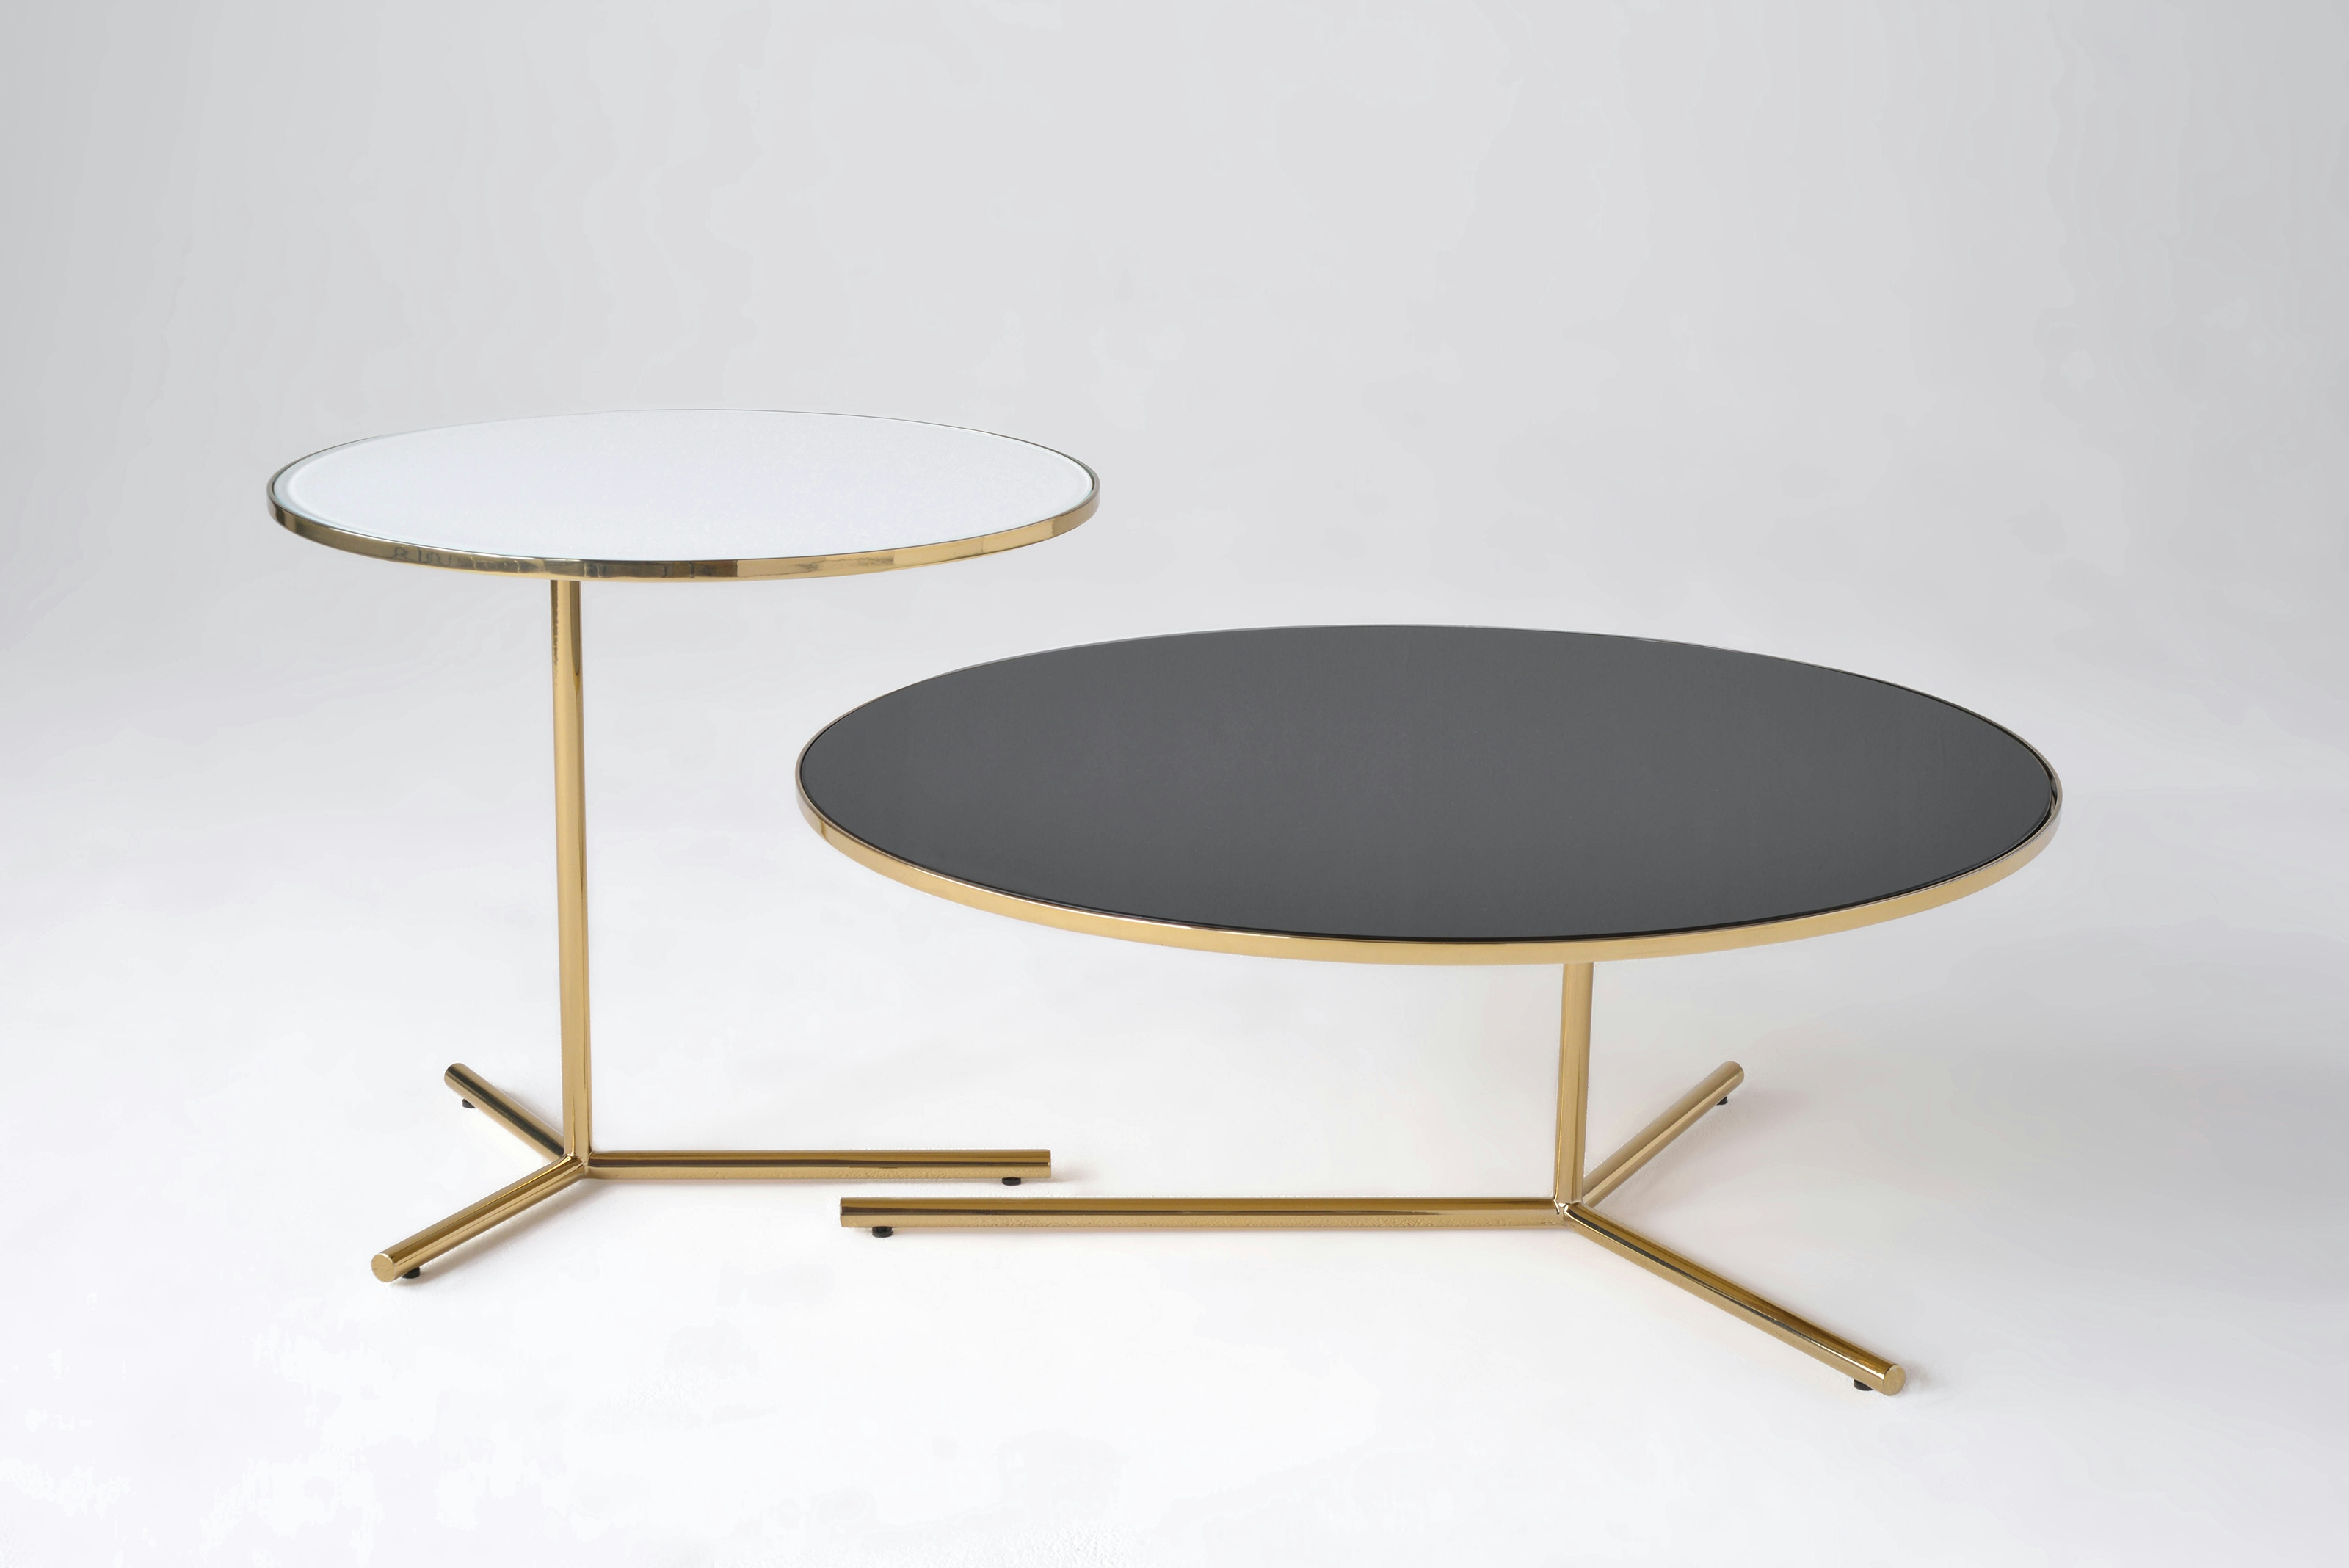 Phase Design Downtown Tables 2 Web